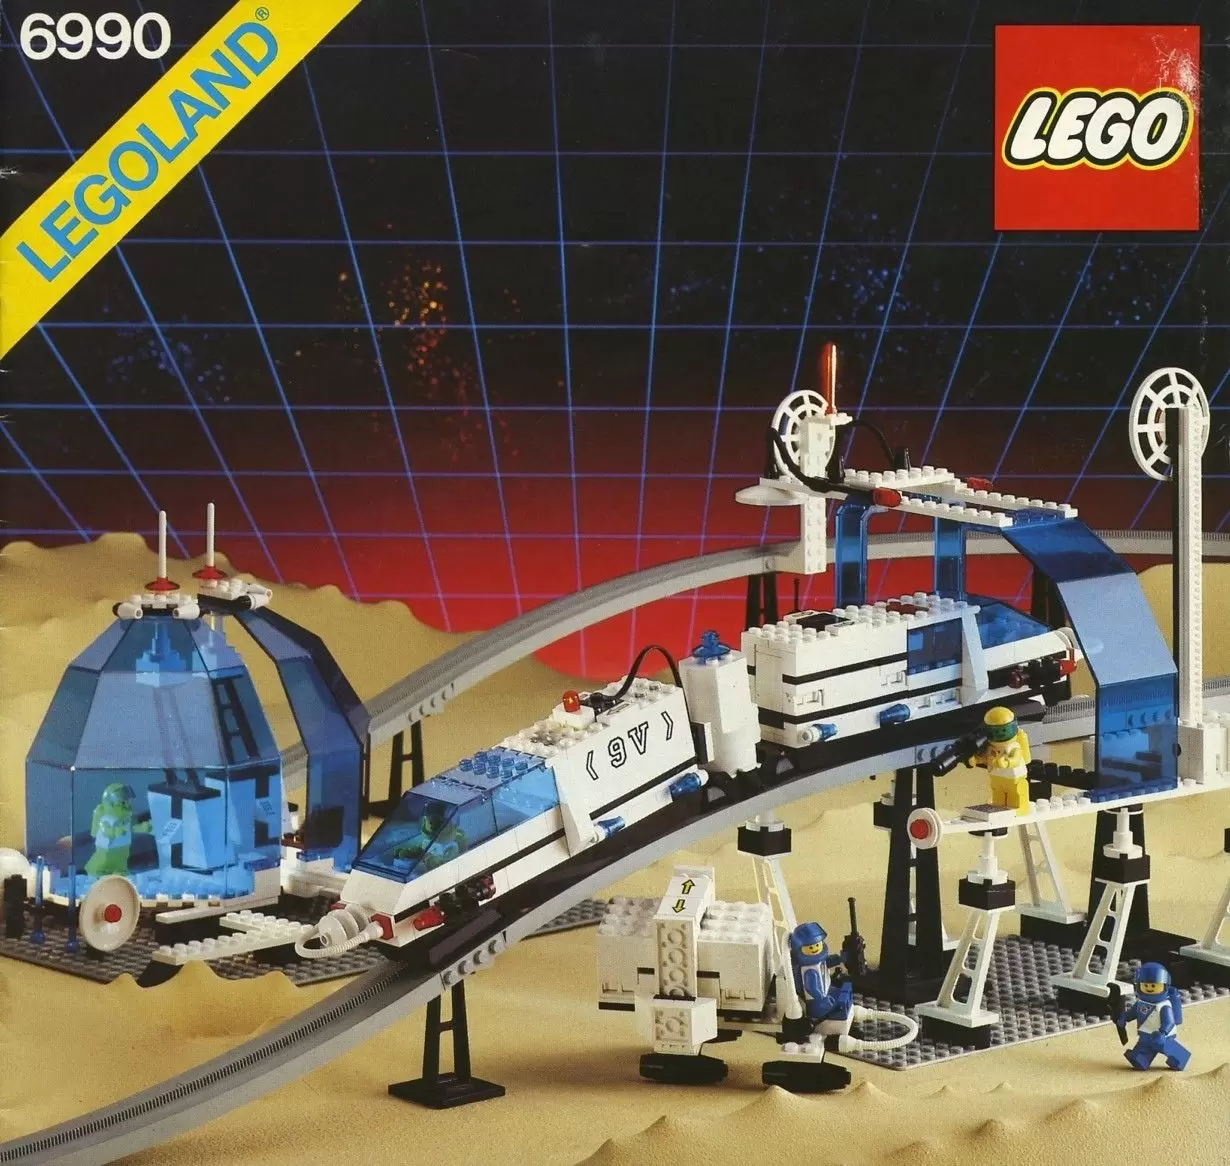 LEGO Space - Monorail Transport System